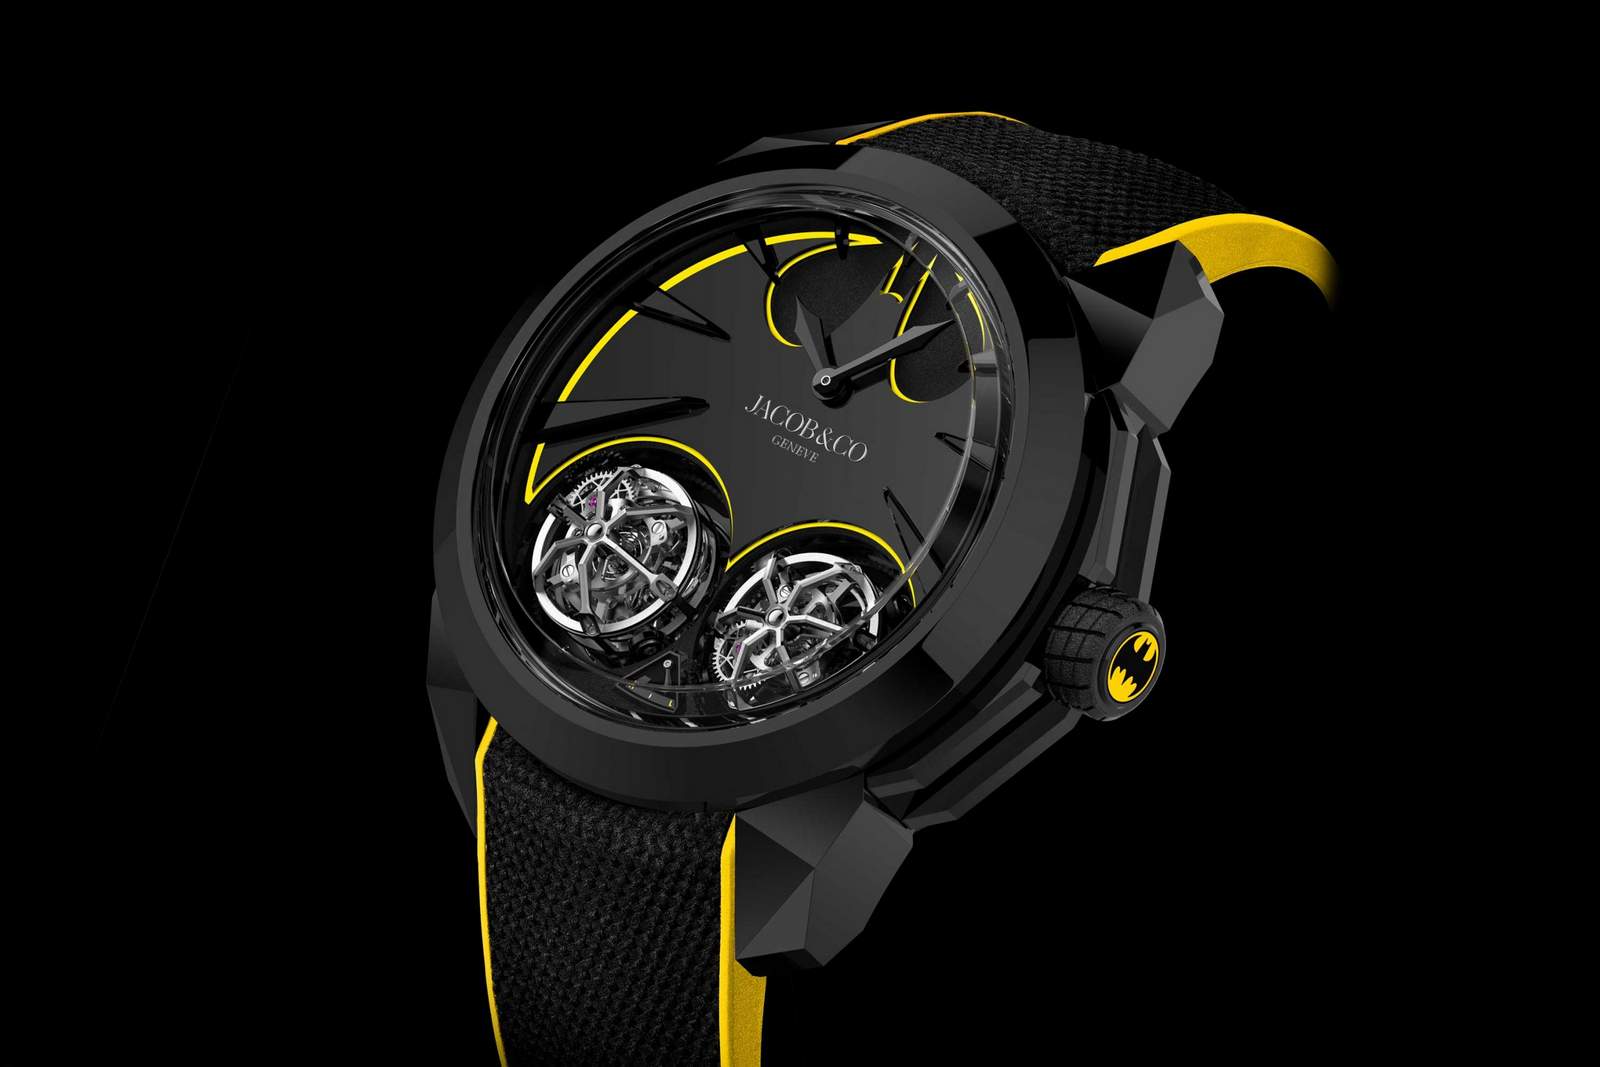 Jacob & Co. pays tribute to Batman with the comic-inspired Gotham City watch